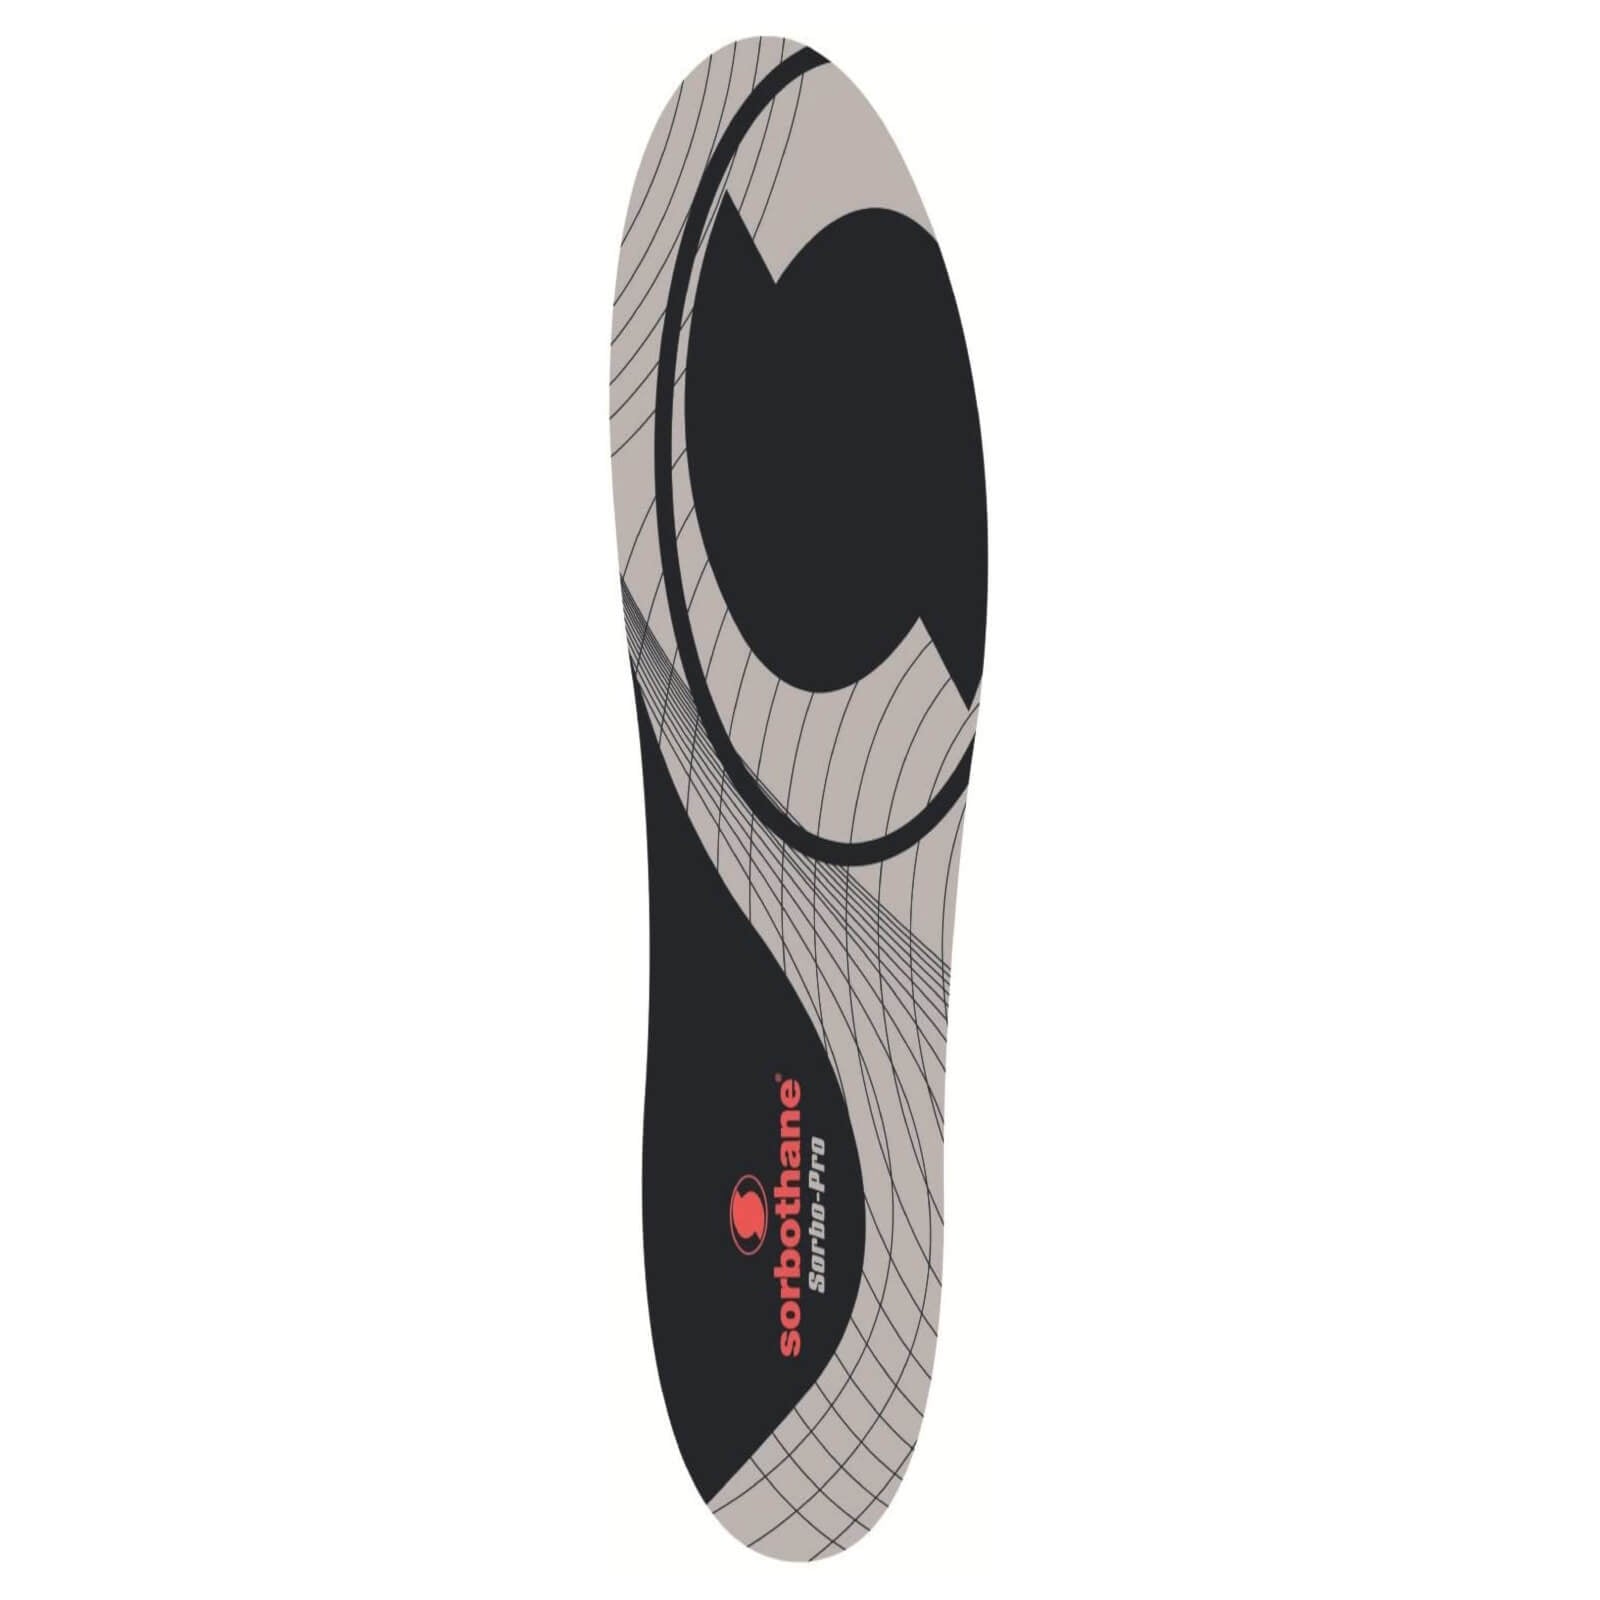 Sorbothane Sorbo Pro Total Control Shoe Insoles 11-12.5 UK